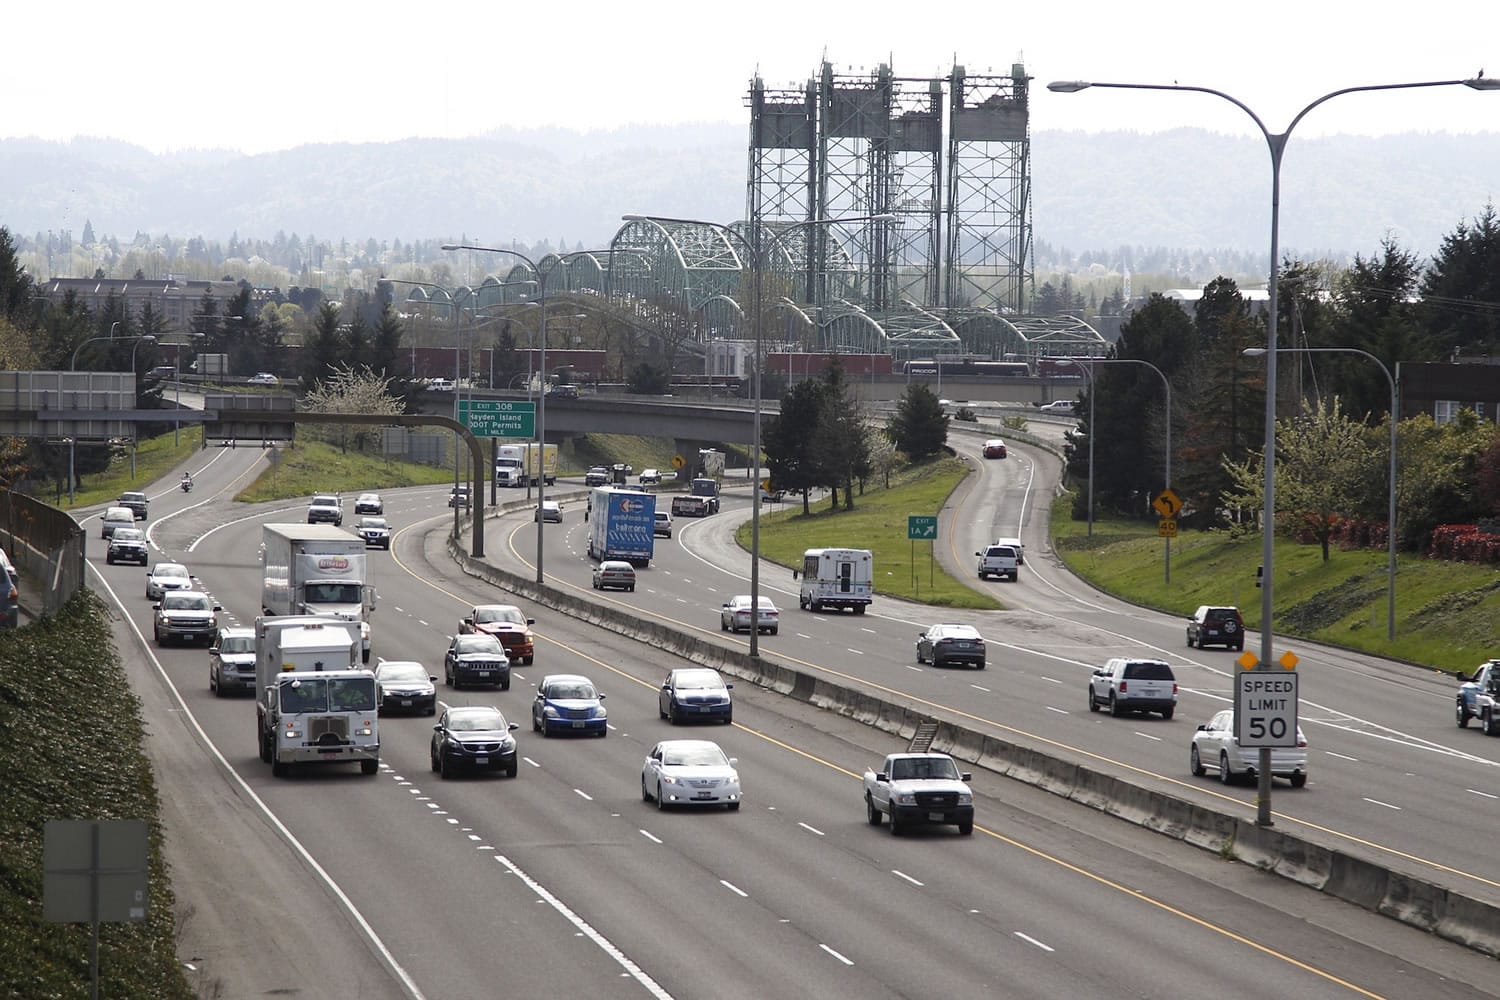 Traffic moves along I-5 near the Interstate Bridge, seen from the Evergreen Boulevard overpass.